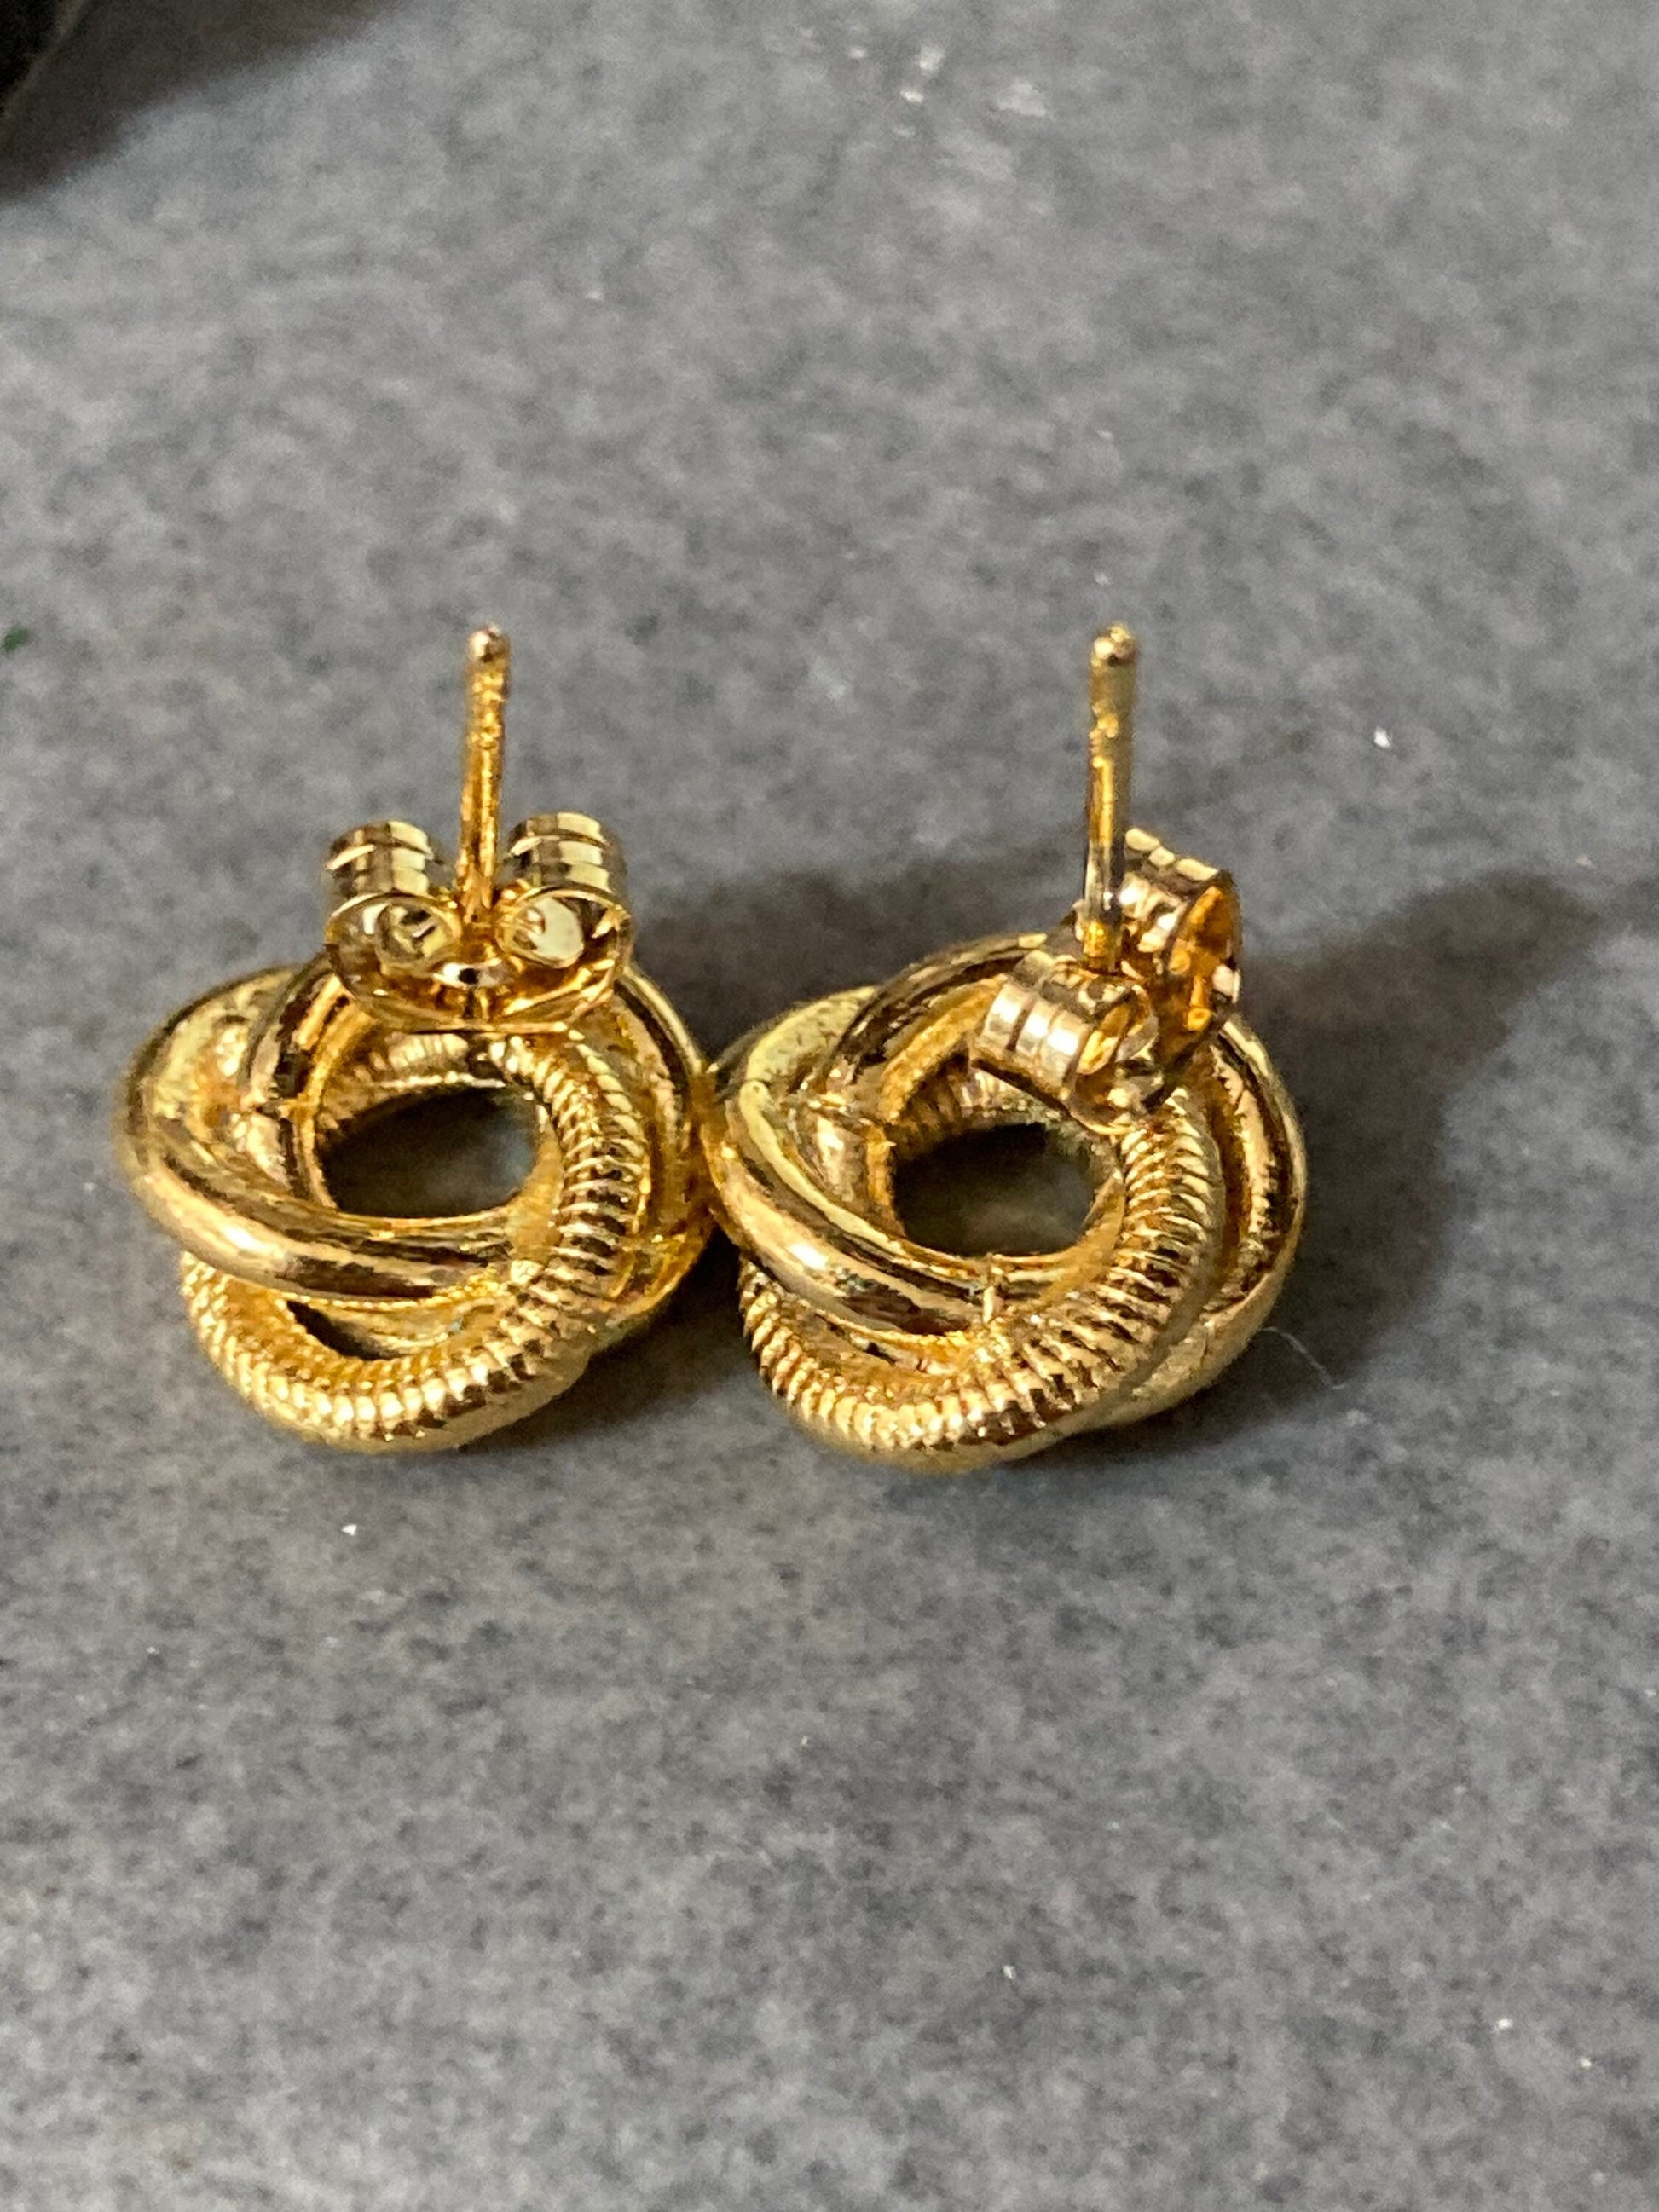 Small knot stud earrings pierced gold tone with rope twist 1cm